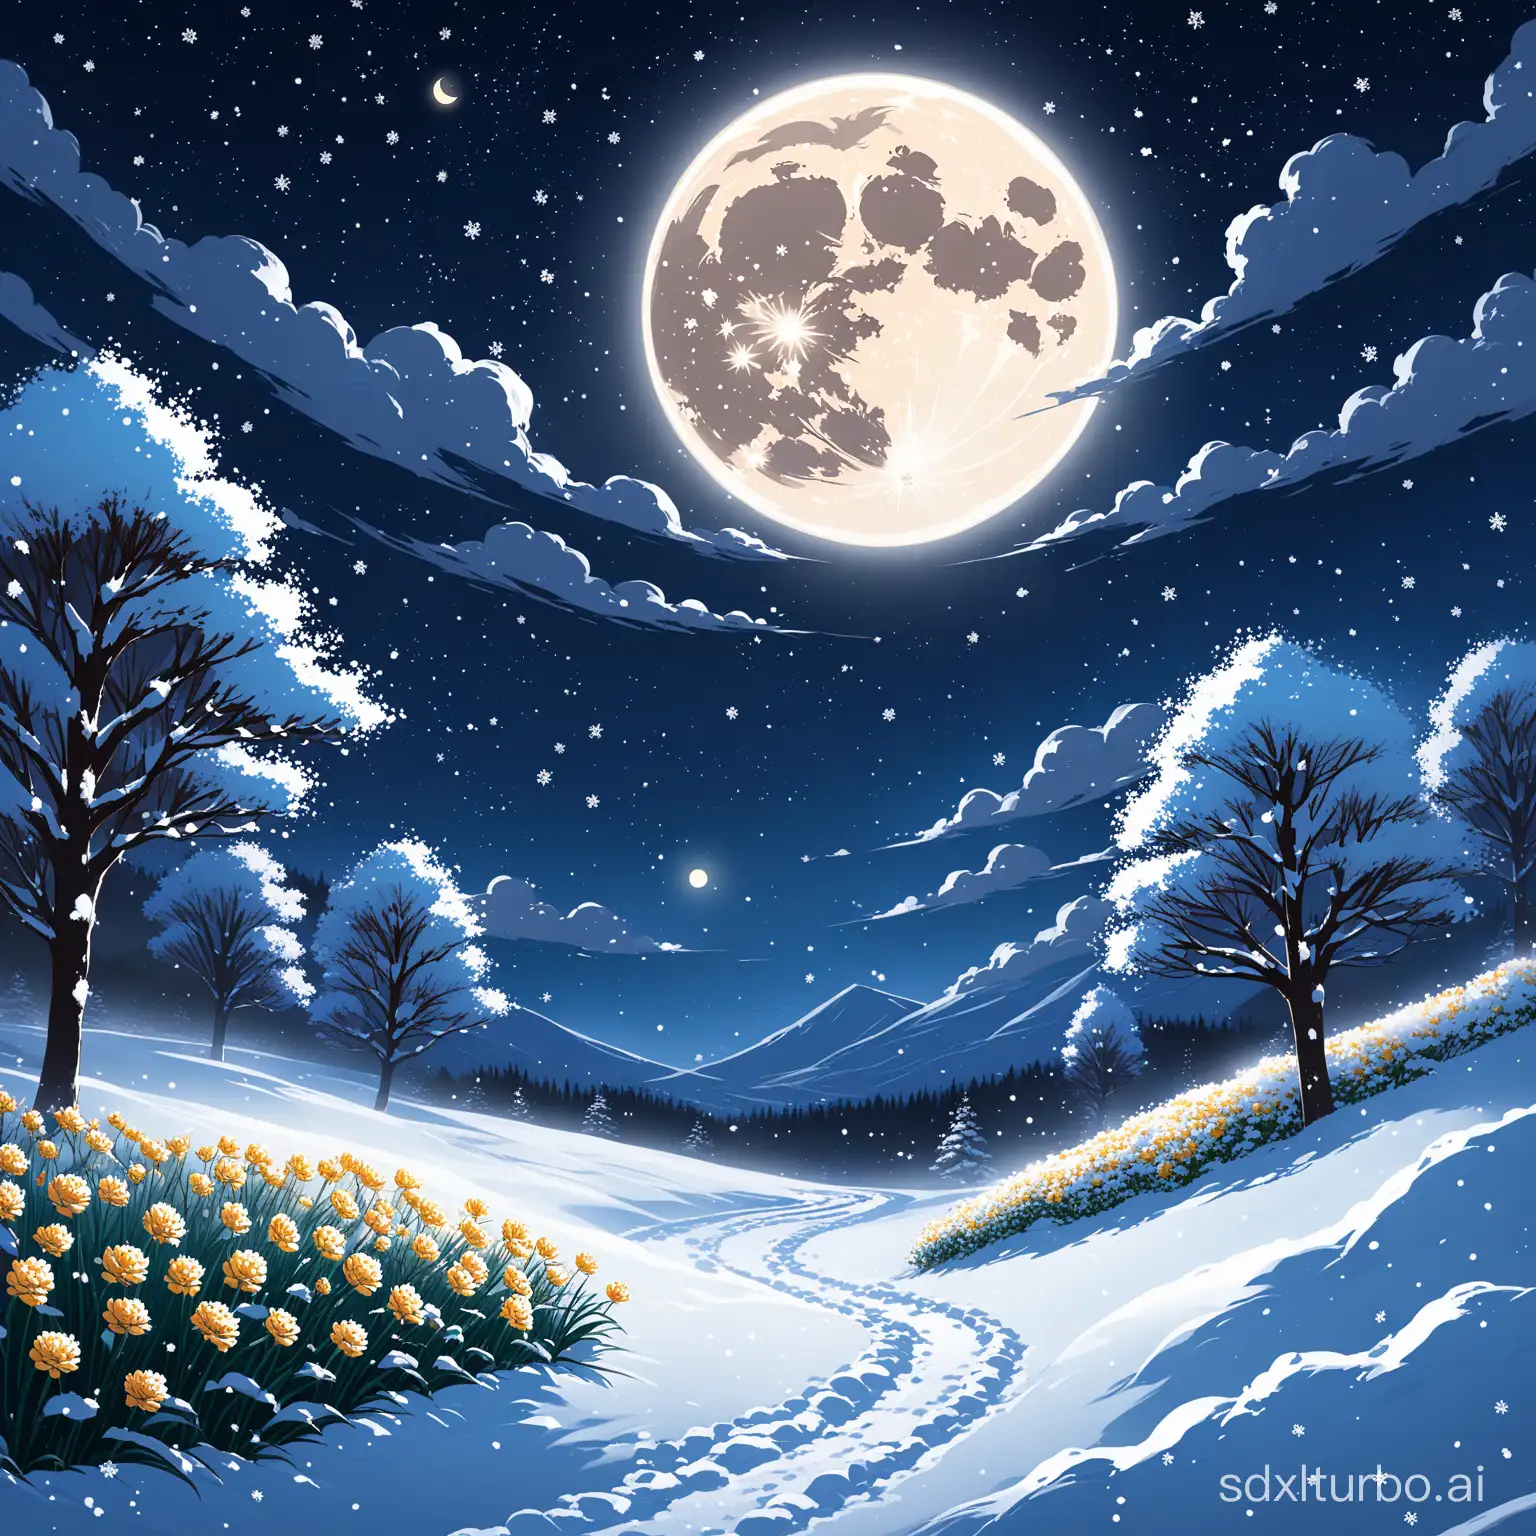 Nighttime-Scene-with-Wind-Flowers-Snow-and-Moon